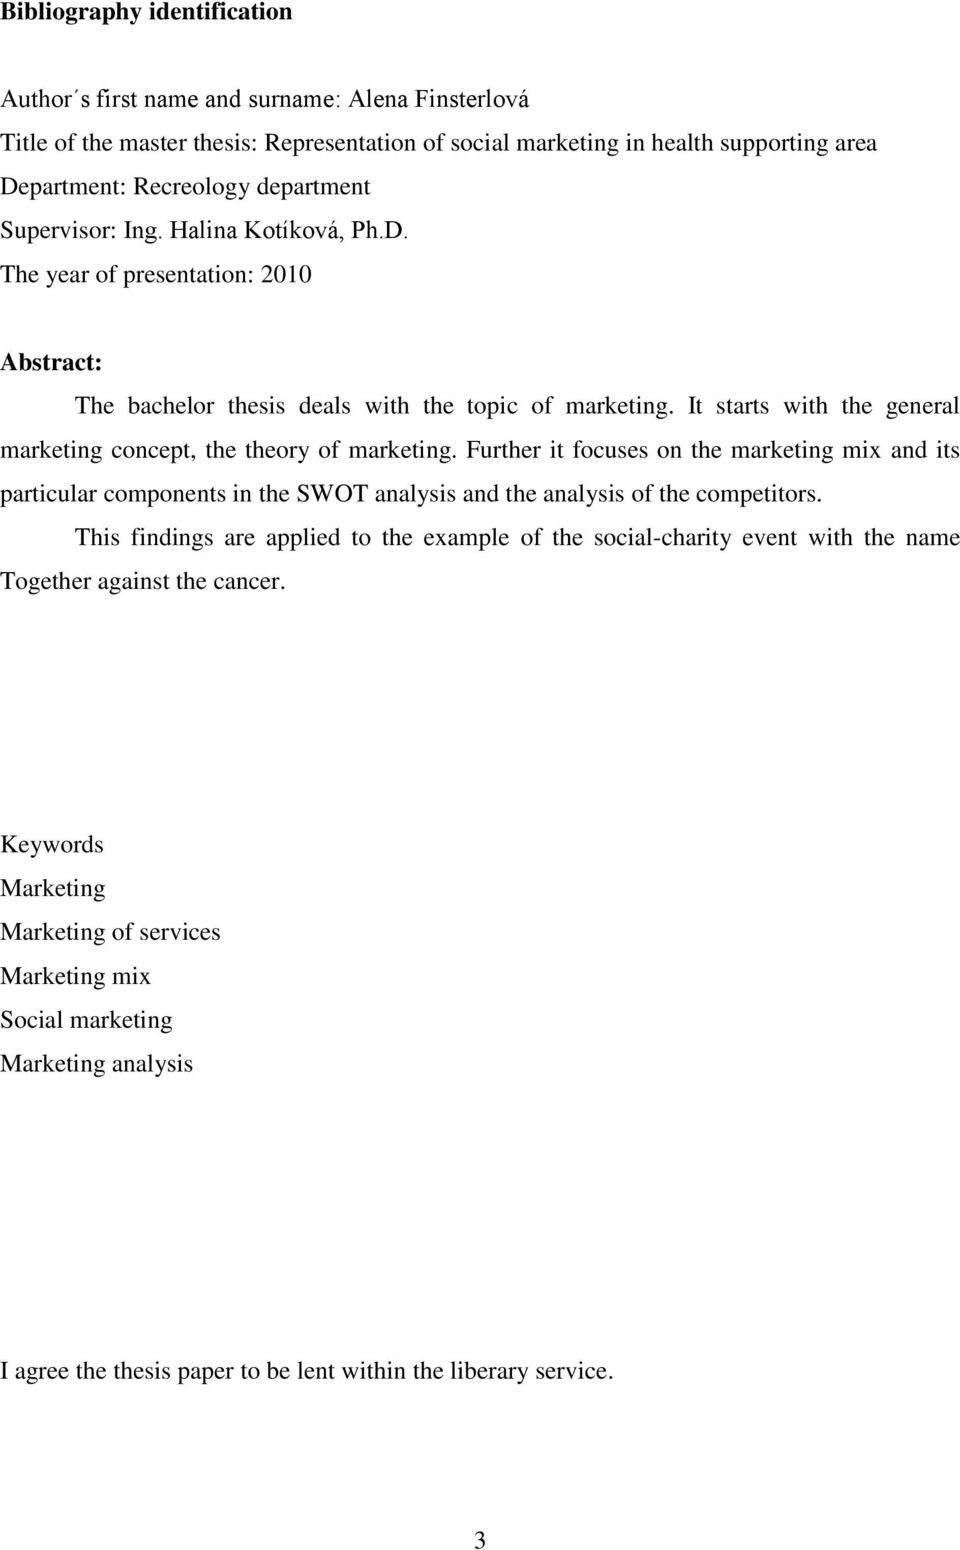 It starts with the general marketing concept, the theory of marketing. Further it focuses on the marketing mix and its particular components in the SWOT analysis and the analysis of the competitors.